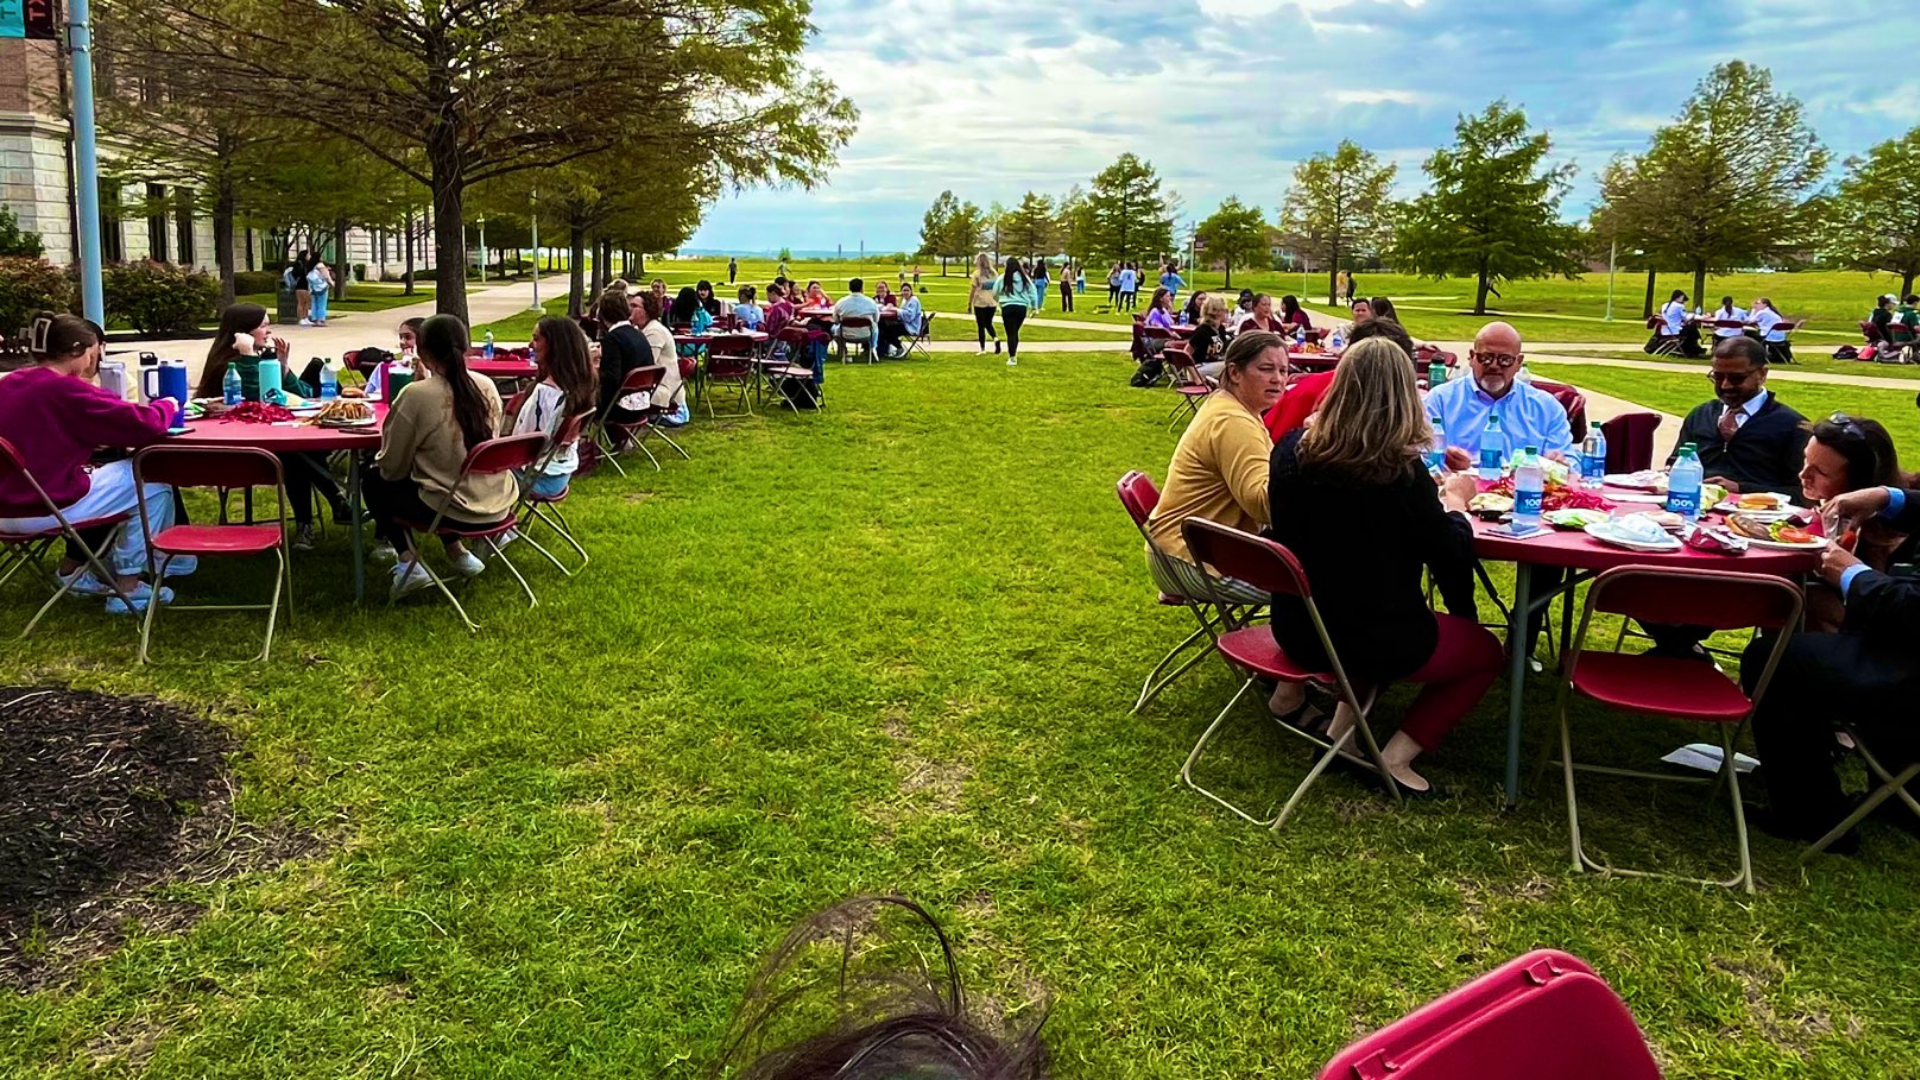 Groups of students, staff, and faculty sit at tables spread out across a grassy area.